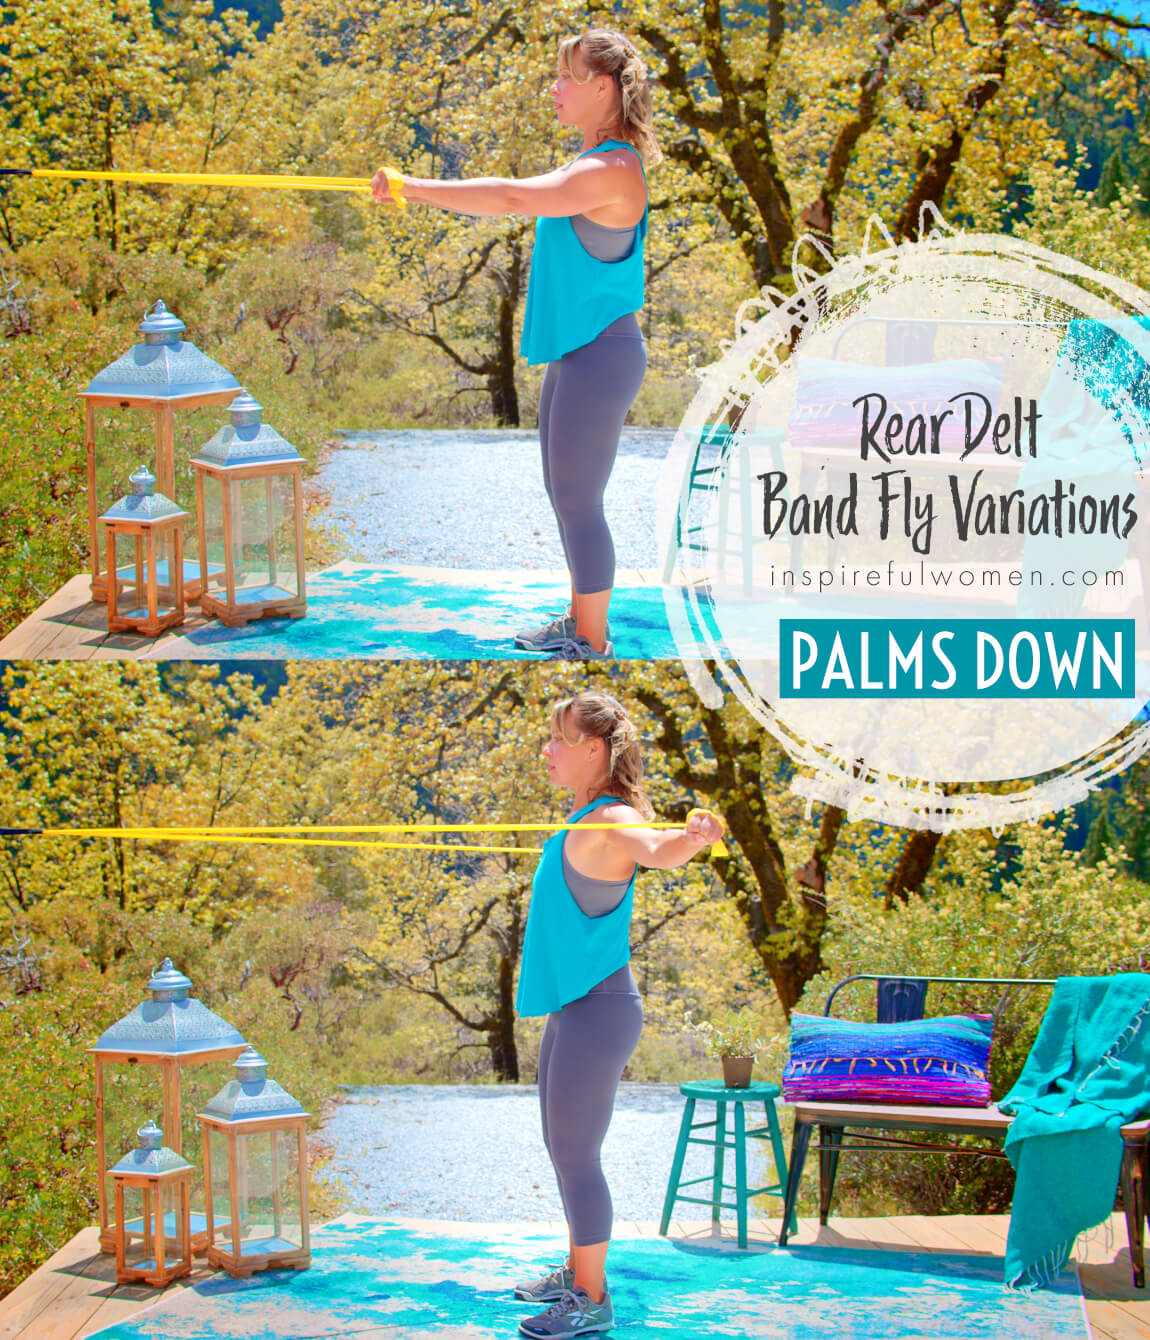 palms-down-rear-delt-banded-fly-wall-anchored-shoulder-exercise-at-home-variations